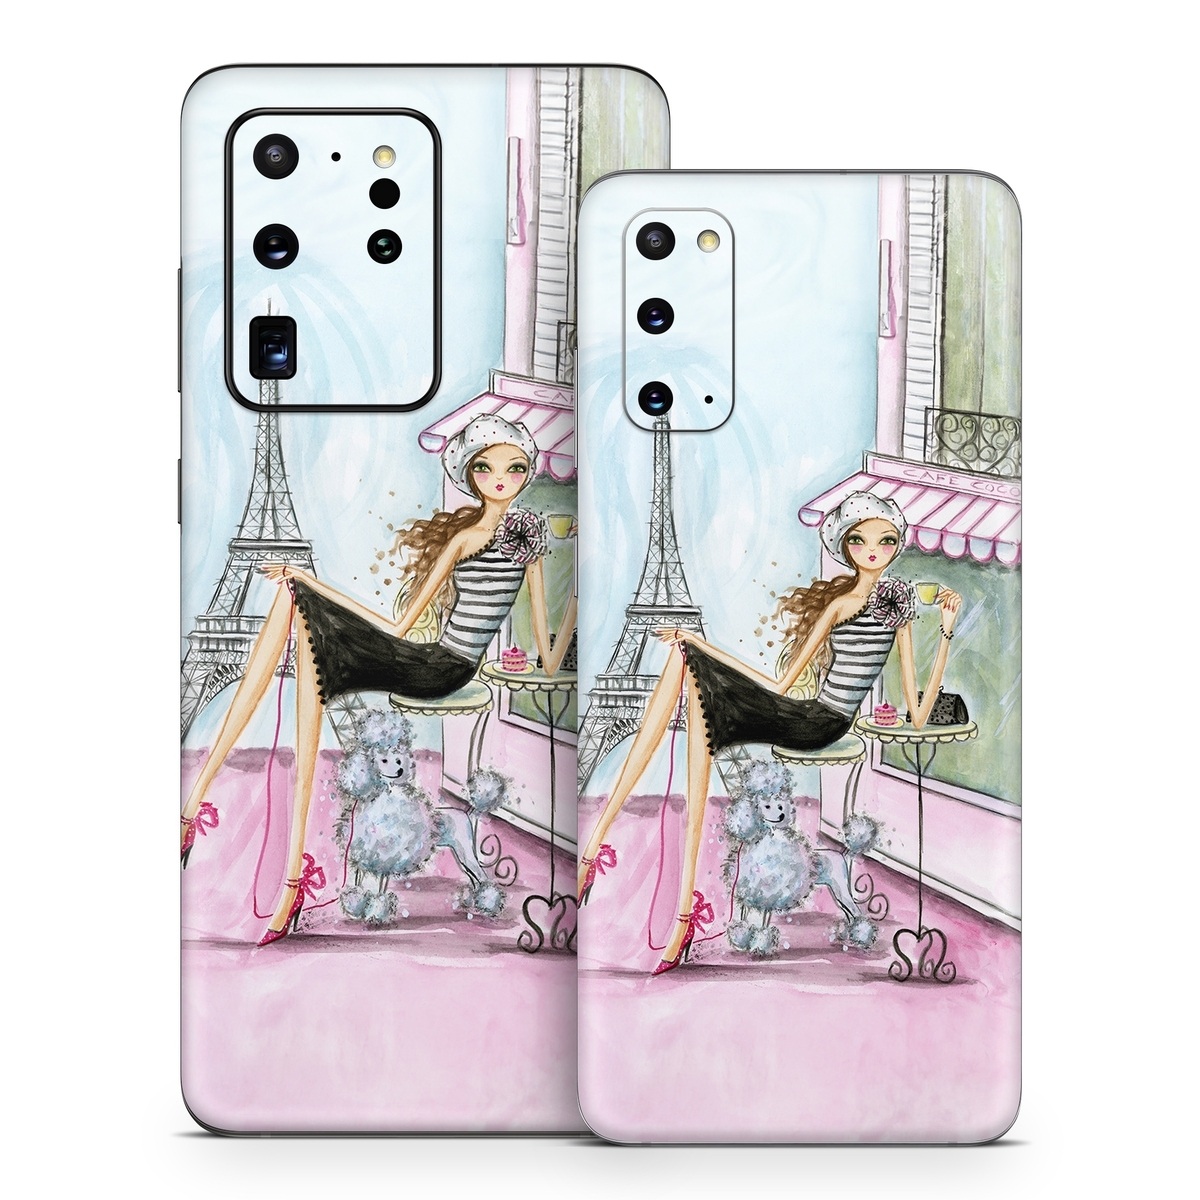 Samsung Galaxy S20 Series Skin design of Pink, Illustration, Sitting, Konghou, Watercolor paint, Fashion illustration, Art, Drawing, Style, with gray, purple, blue, black, pink colors